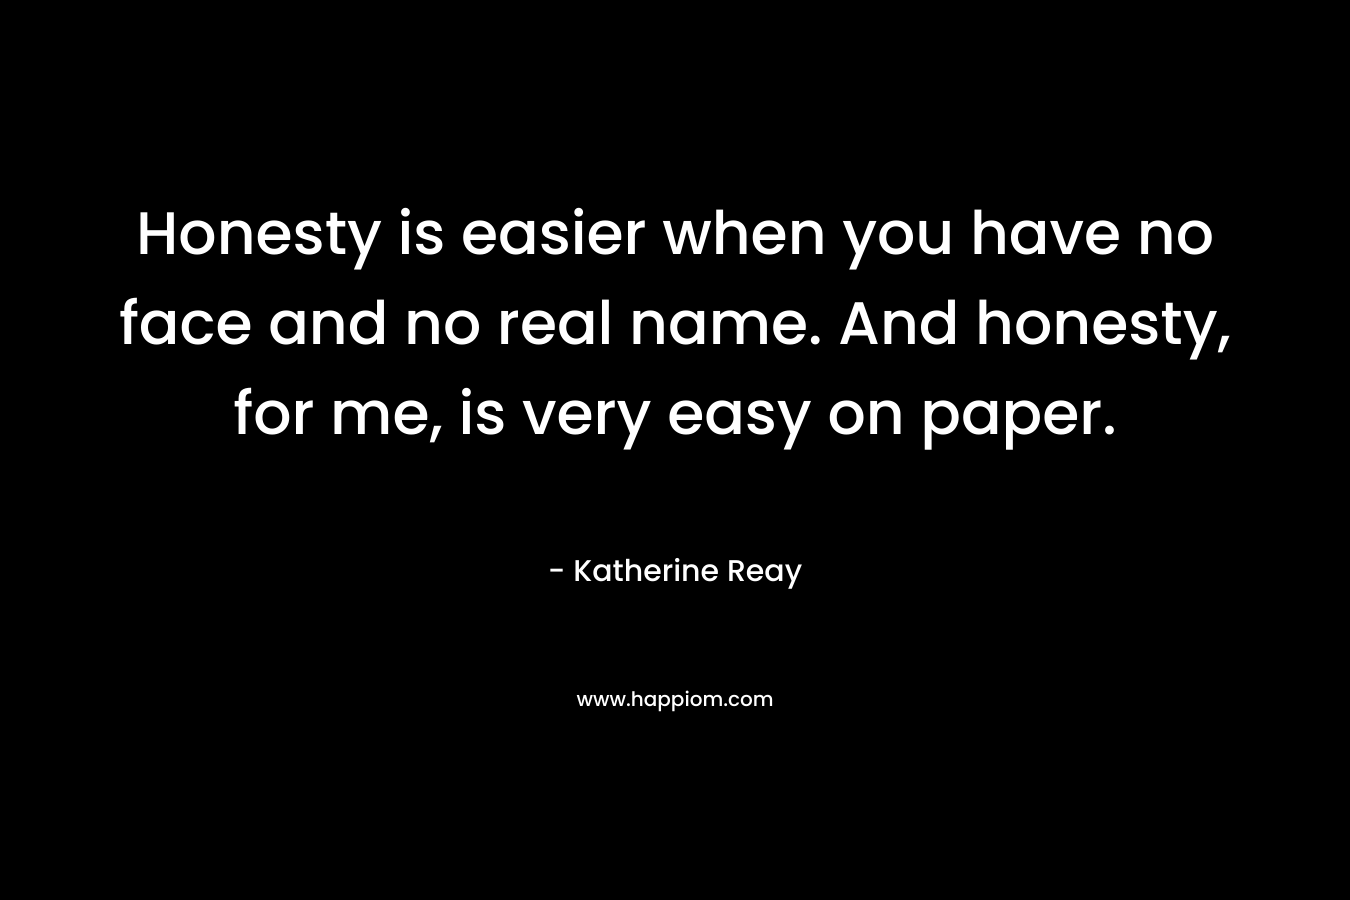 Honesty is easier when you have no face and no real name. And honesty, for me, is very easy on paper. – Katherine Reay